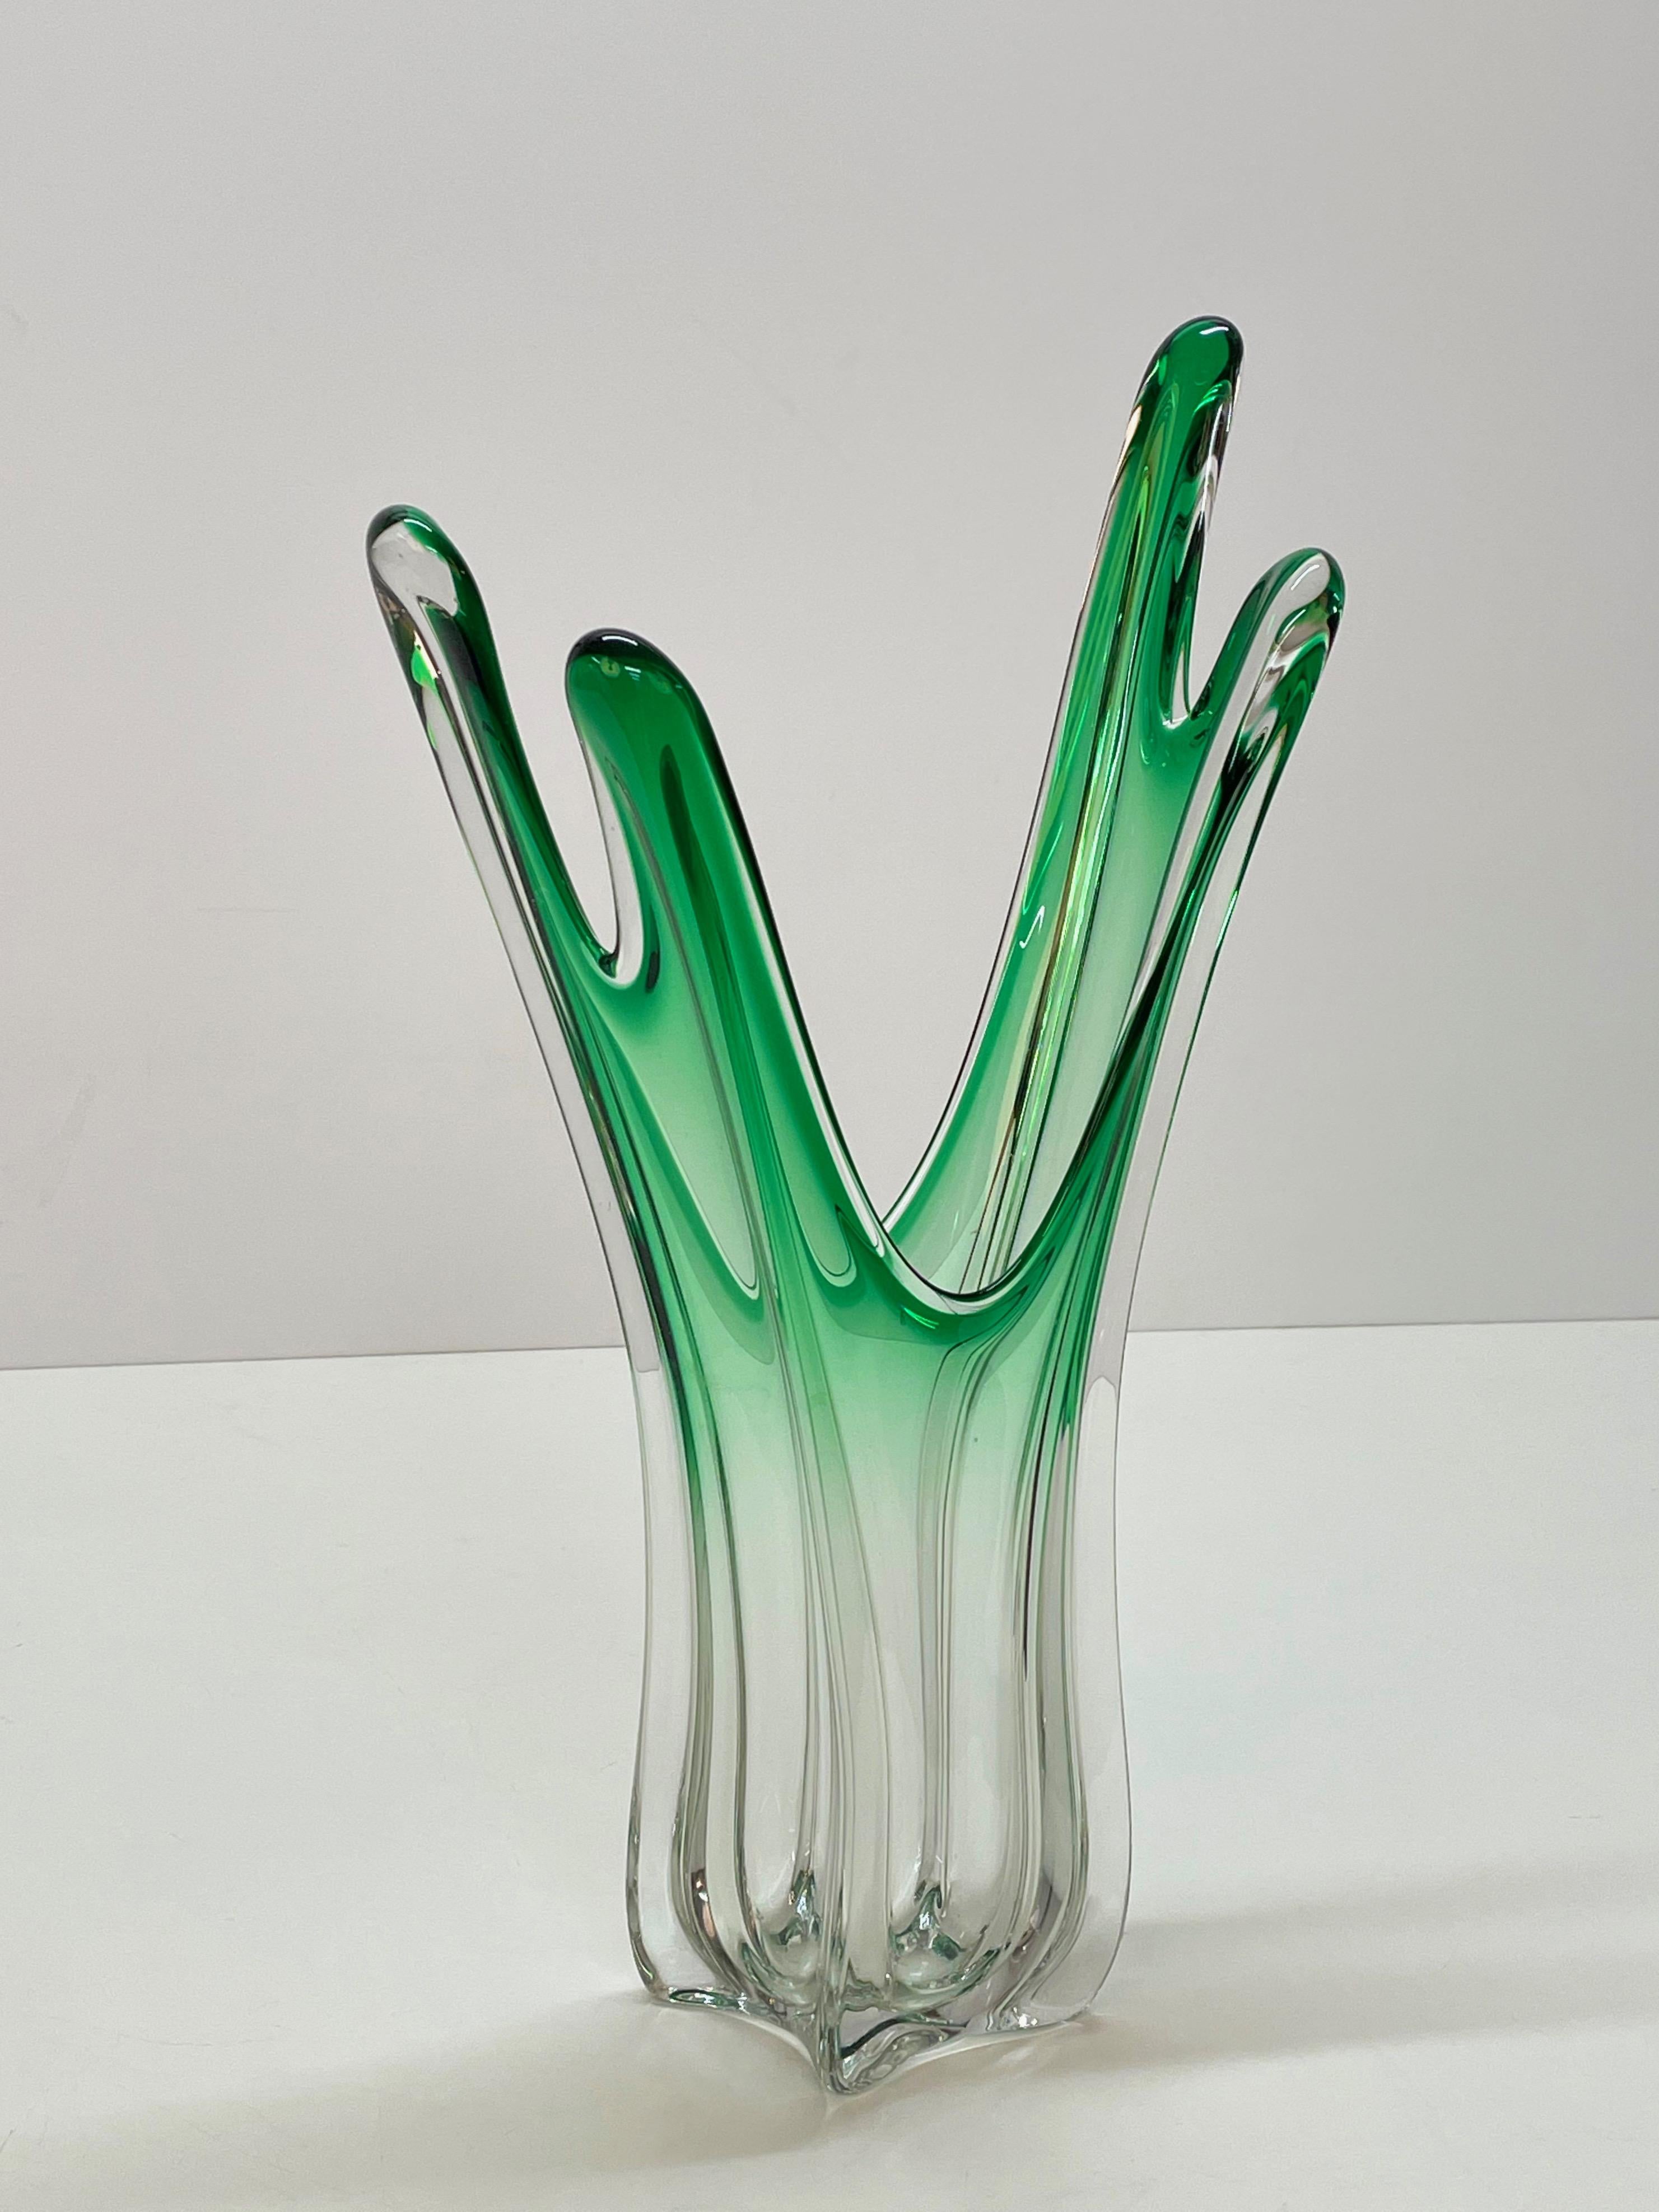 Midcentury Green Art Murano Glass Italian Vase Attributed to F.lli Toso, 1950s For Sale 11